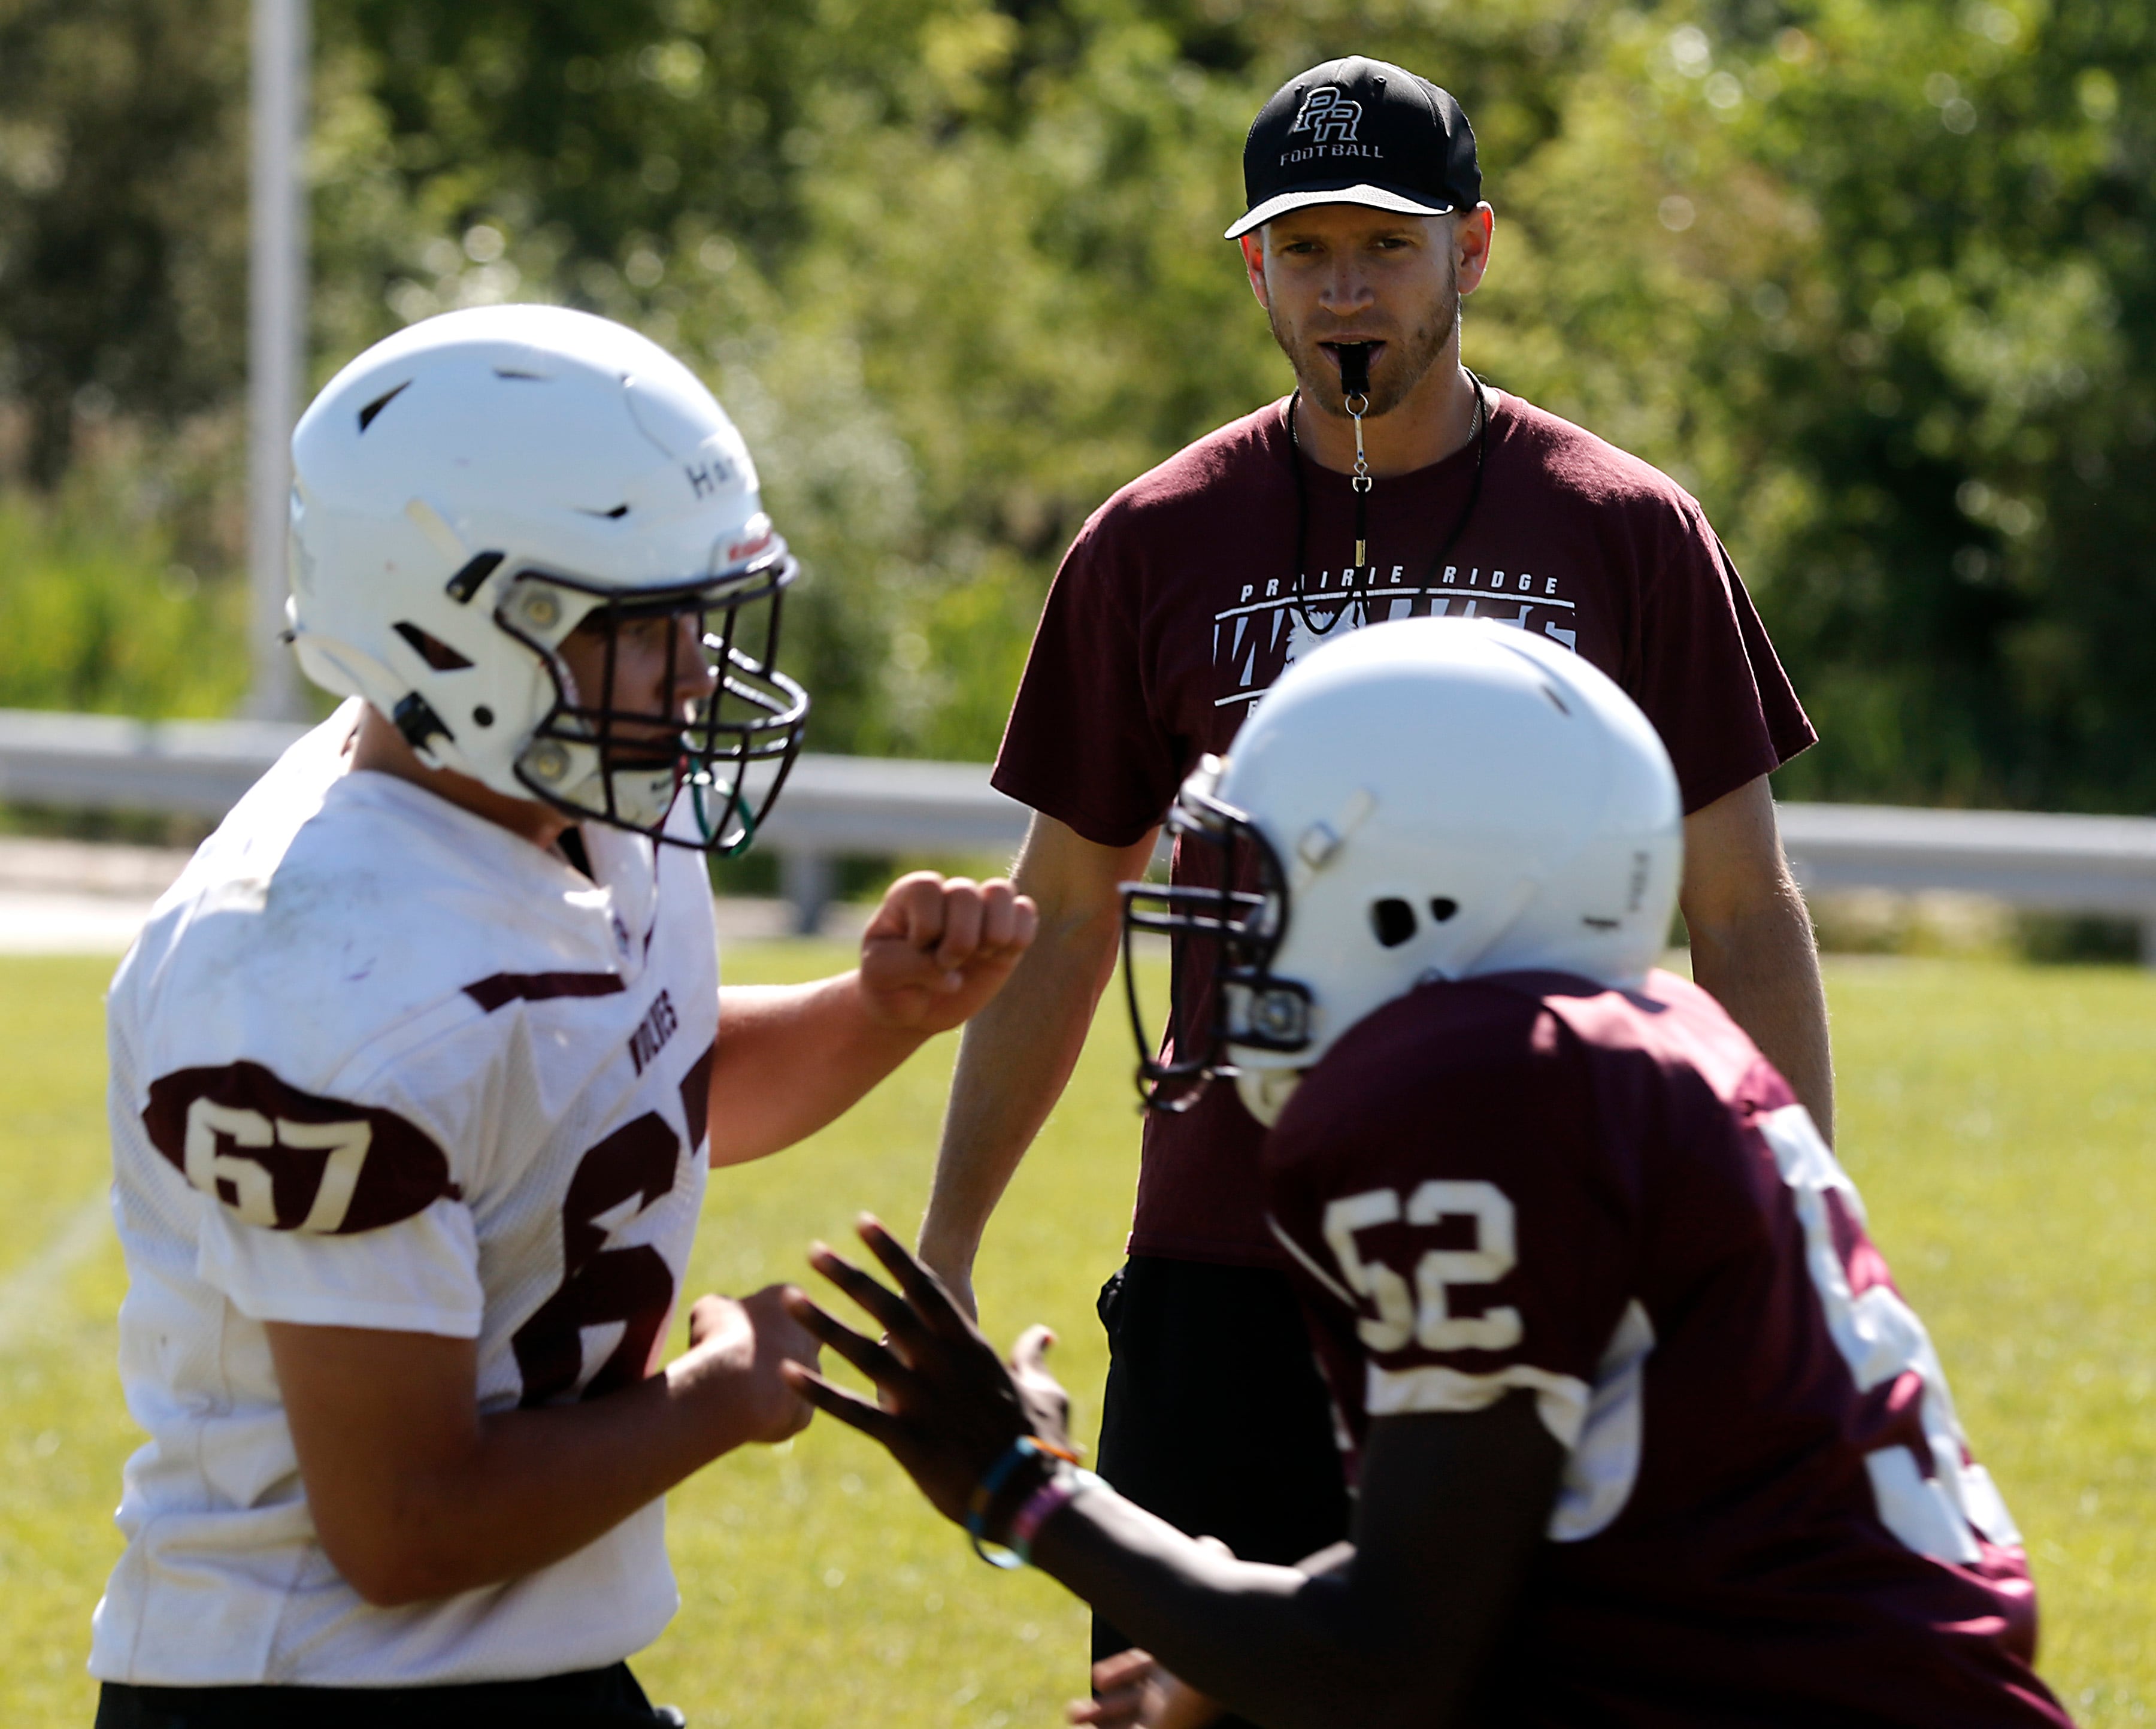 Mike Frericks begins 1st year as Prairie Ridge head coach, excited to tackle new challenge